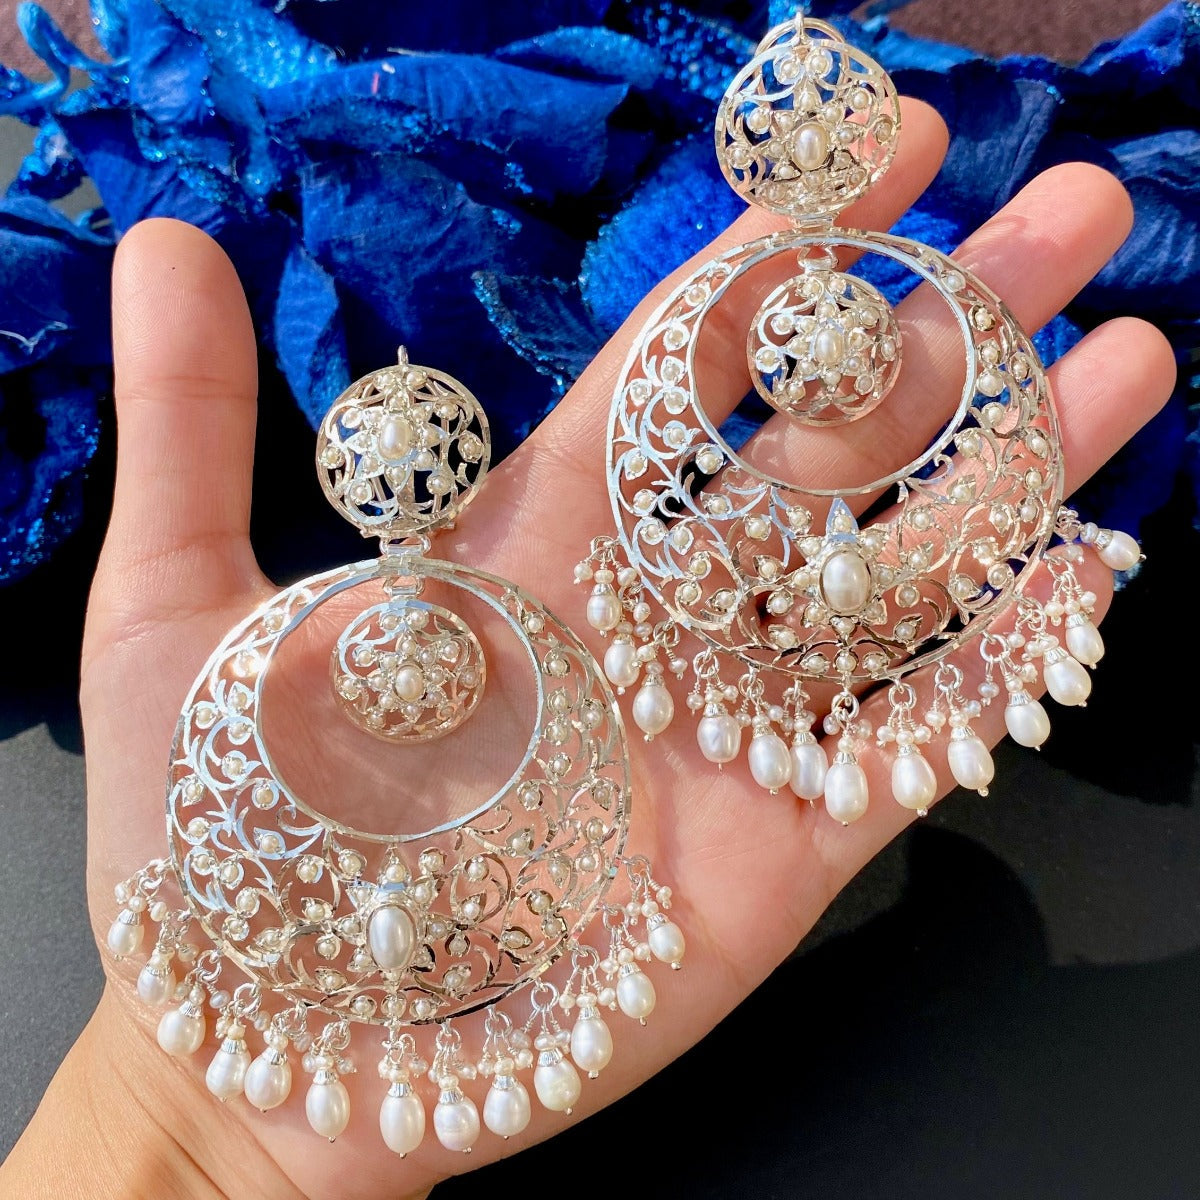 Indian Silver Earrings with Edwardian Victorian Flavor